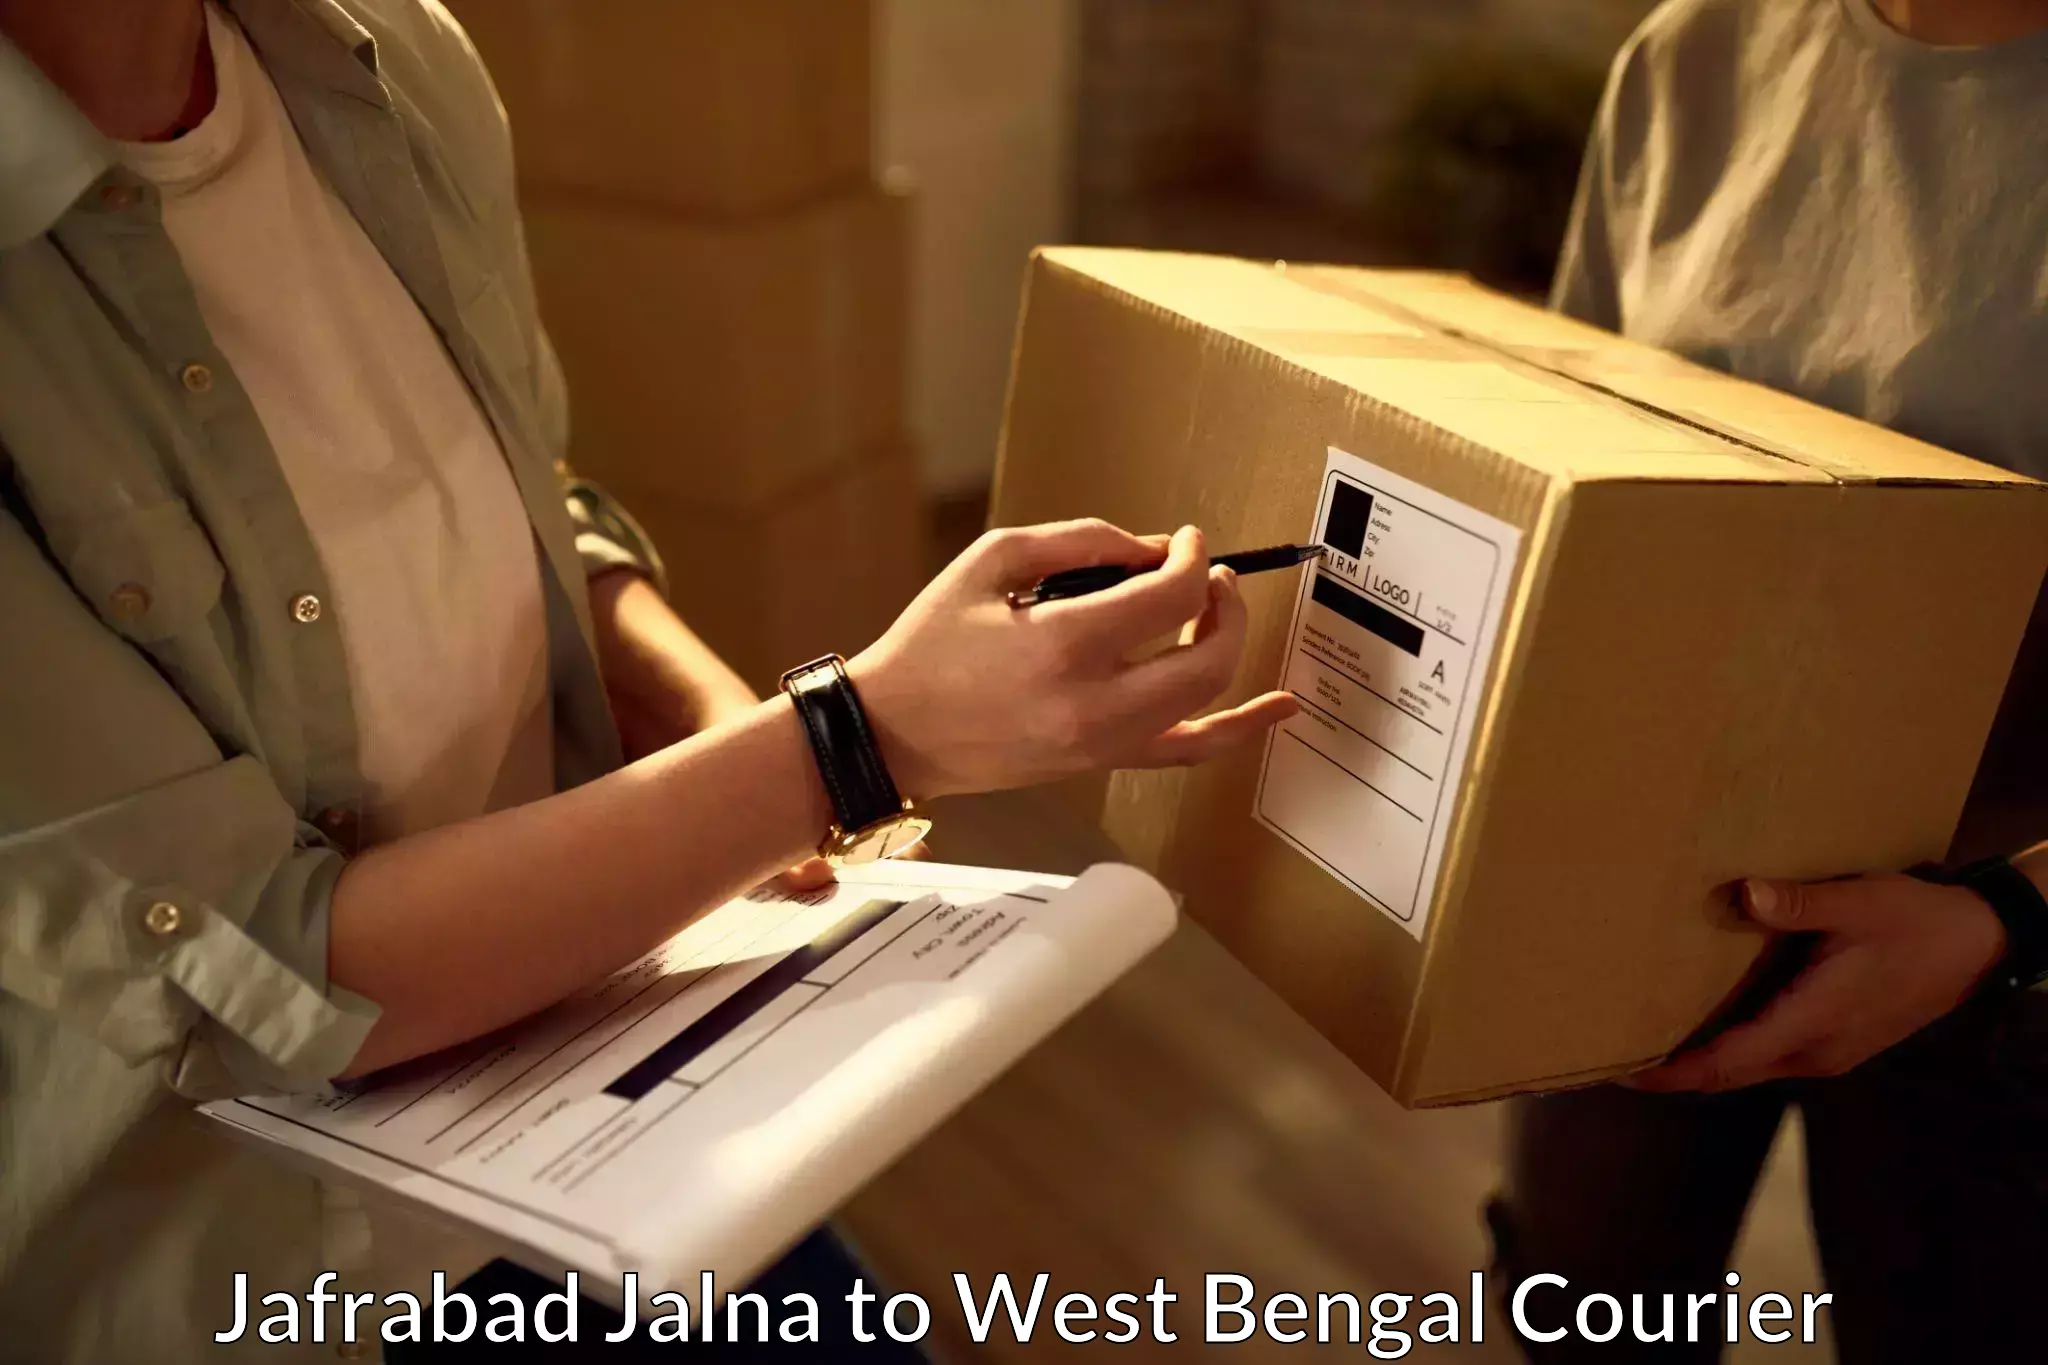 Subscription-based courier Jafrabad Jalna to West Bengal